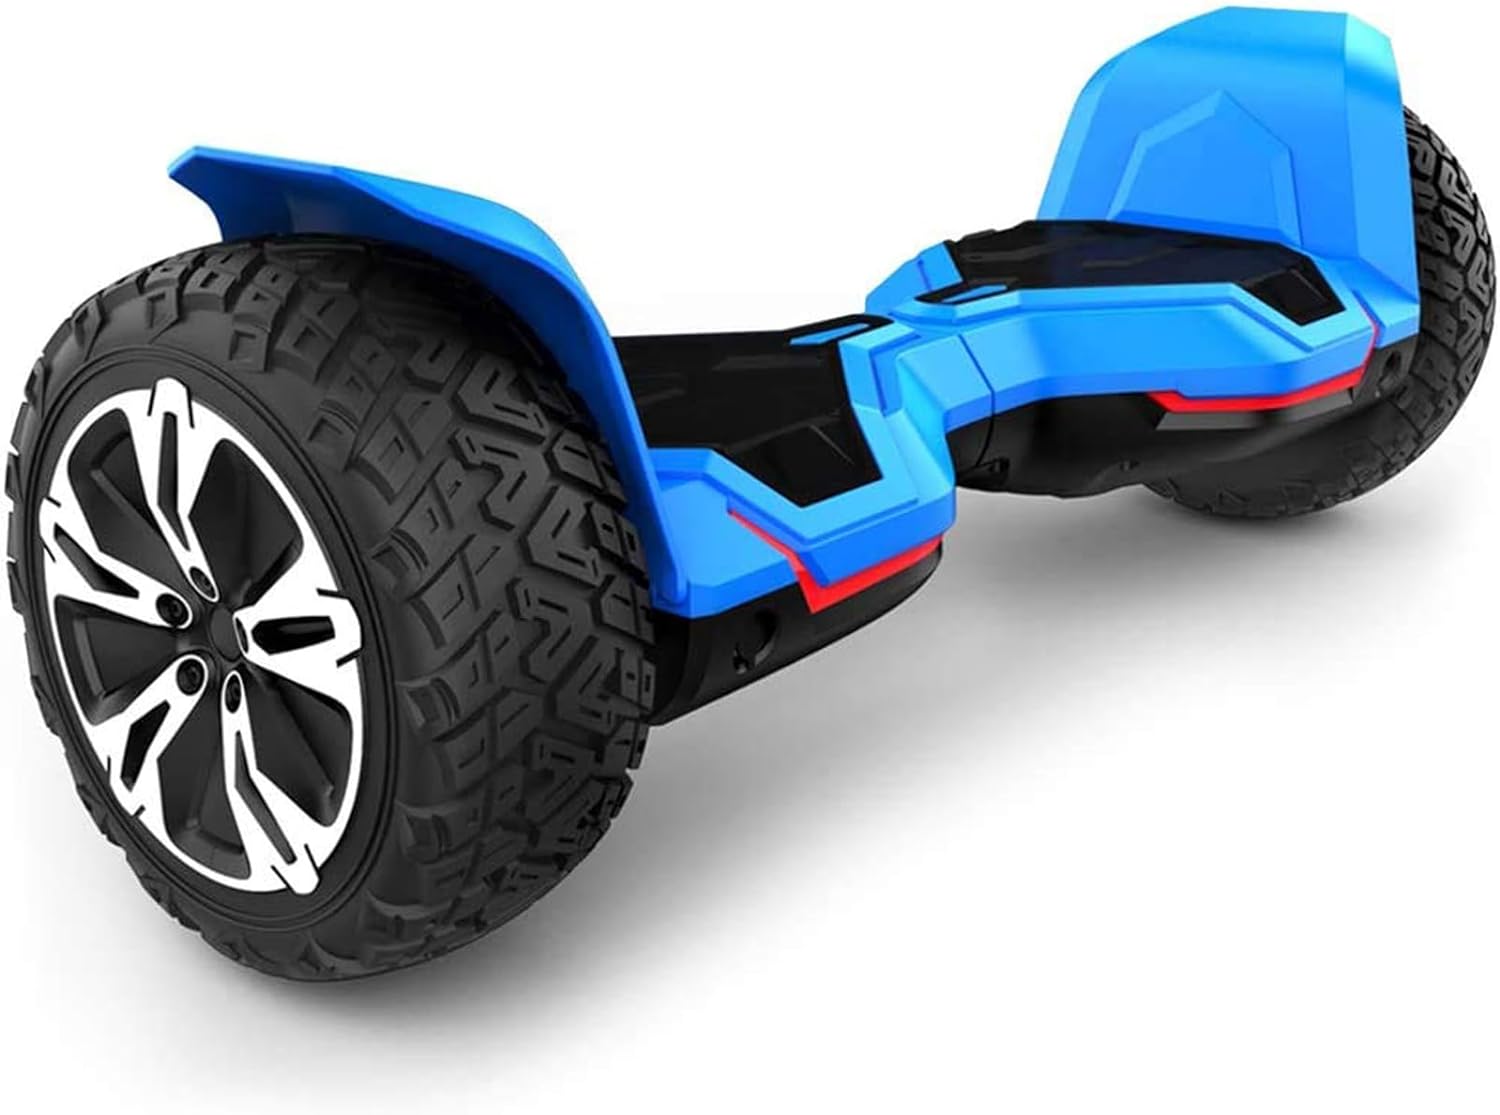 Gyroor Warrior 8.5 inch All Terrain Off Road Hoverboard with Bluetooth Speakers and LED Lights